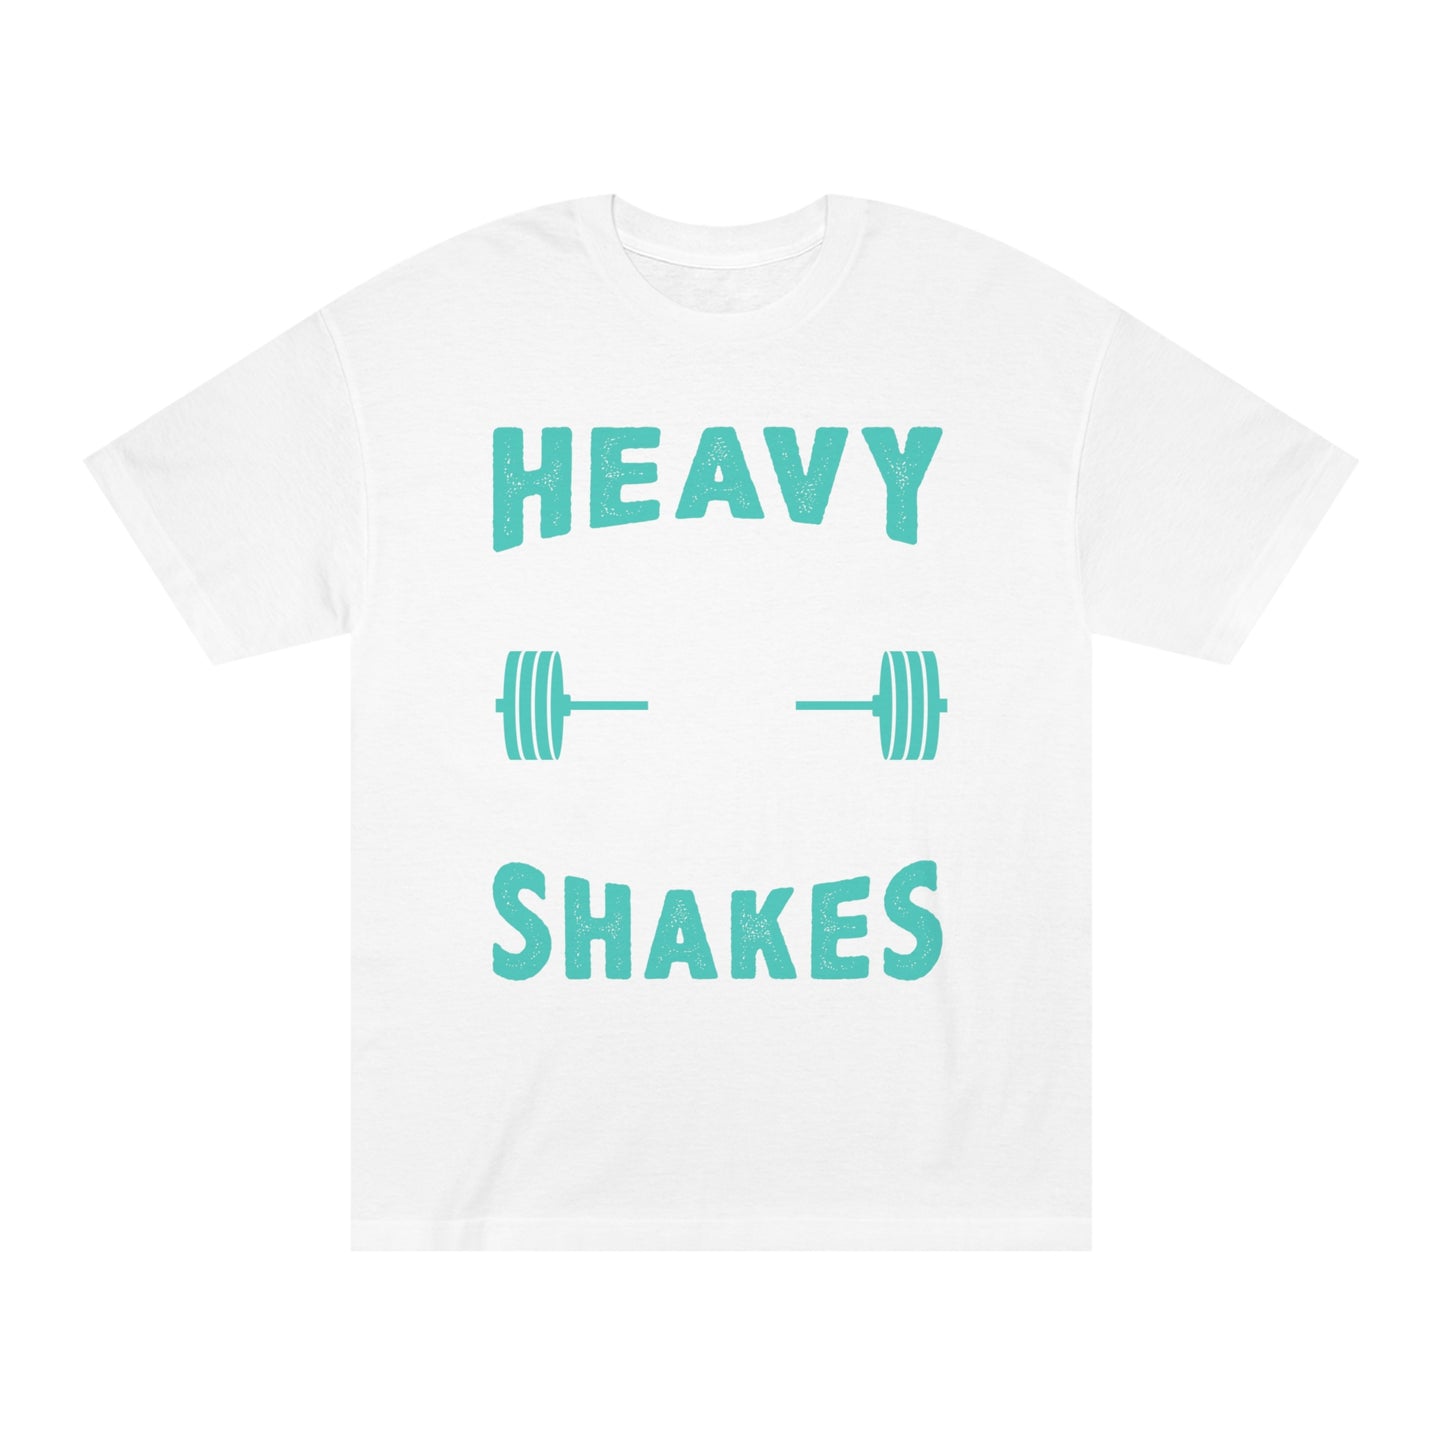 Heavy weights and protein shakes Unisex Classic Tee